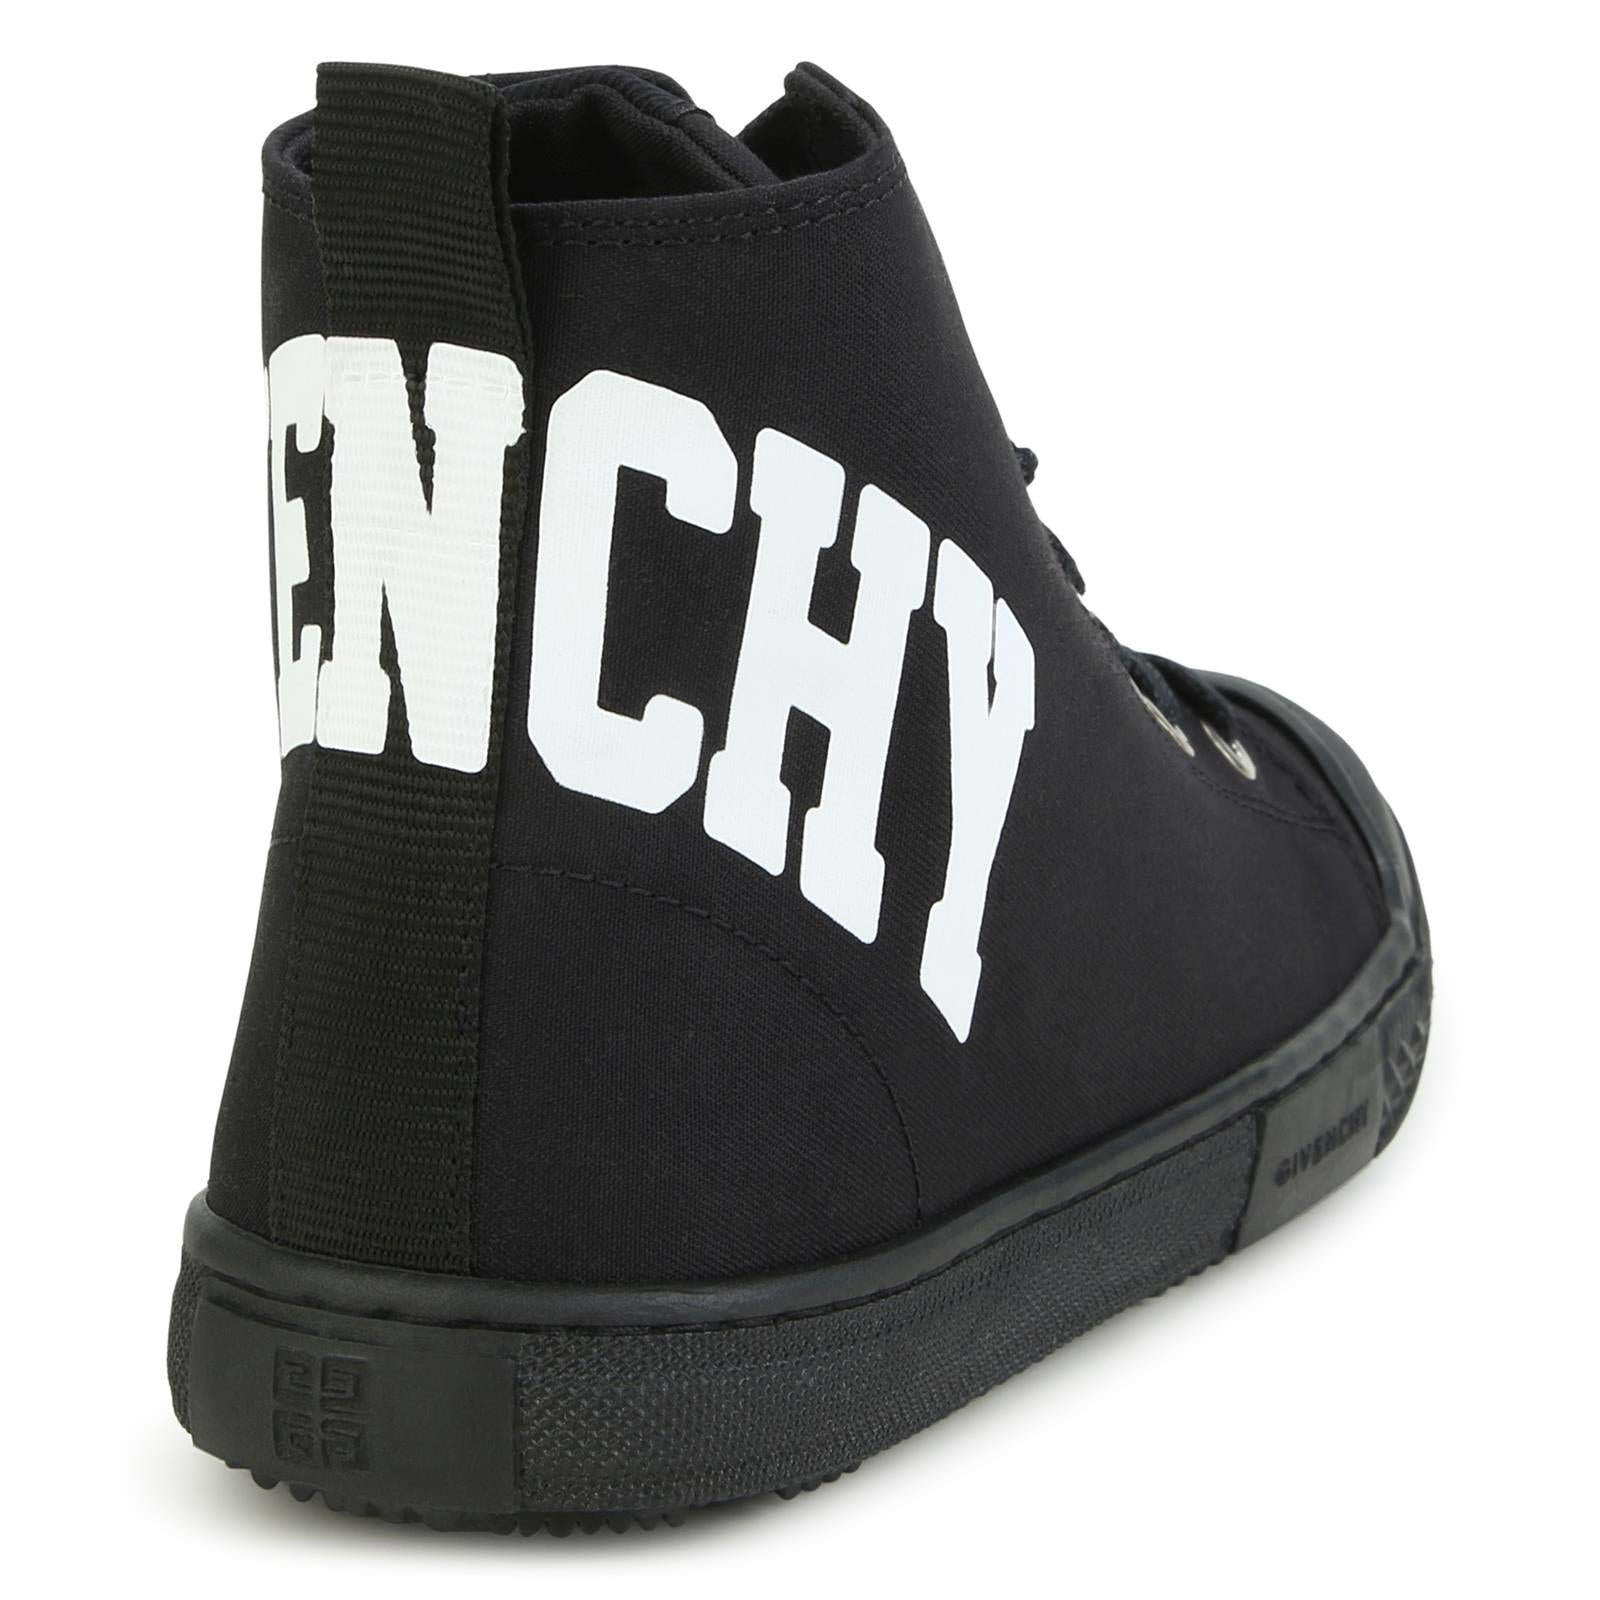 Givenchy High-Top Black Sneakers